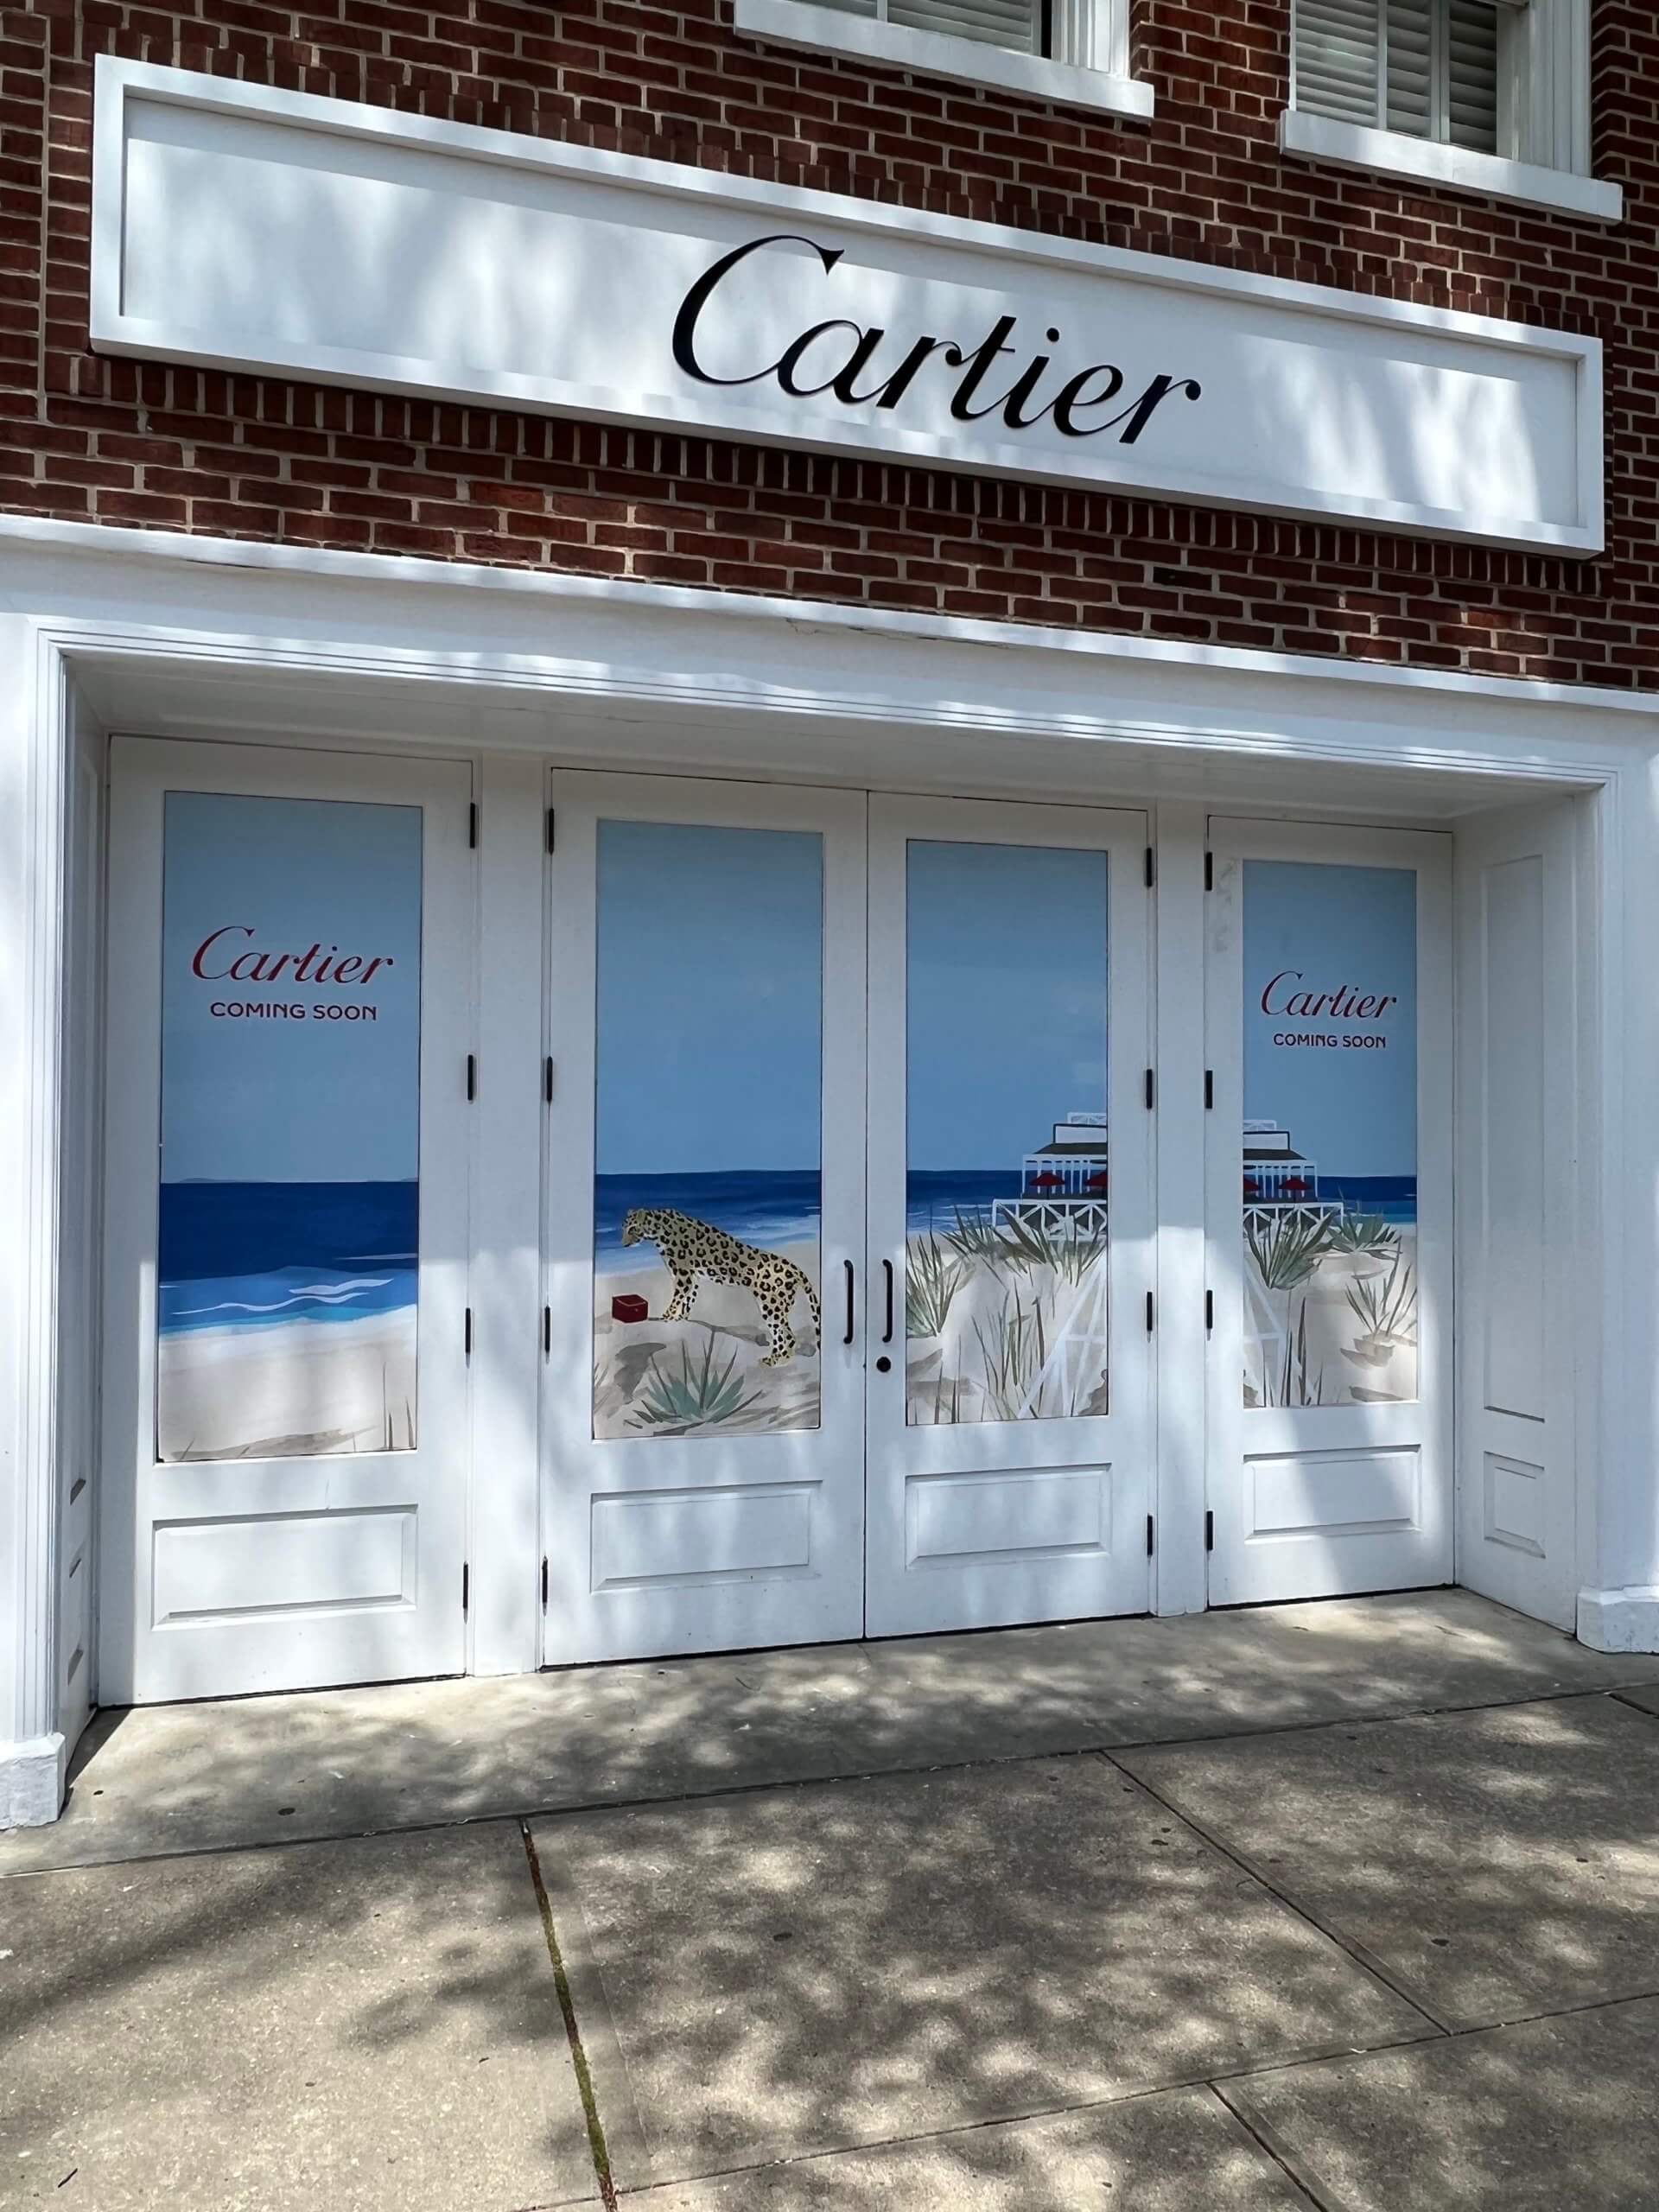 Cartier, welcome to the Hamptons. Their beautiful new store is